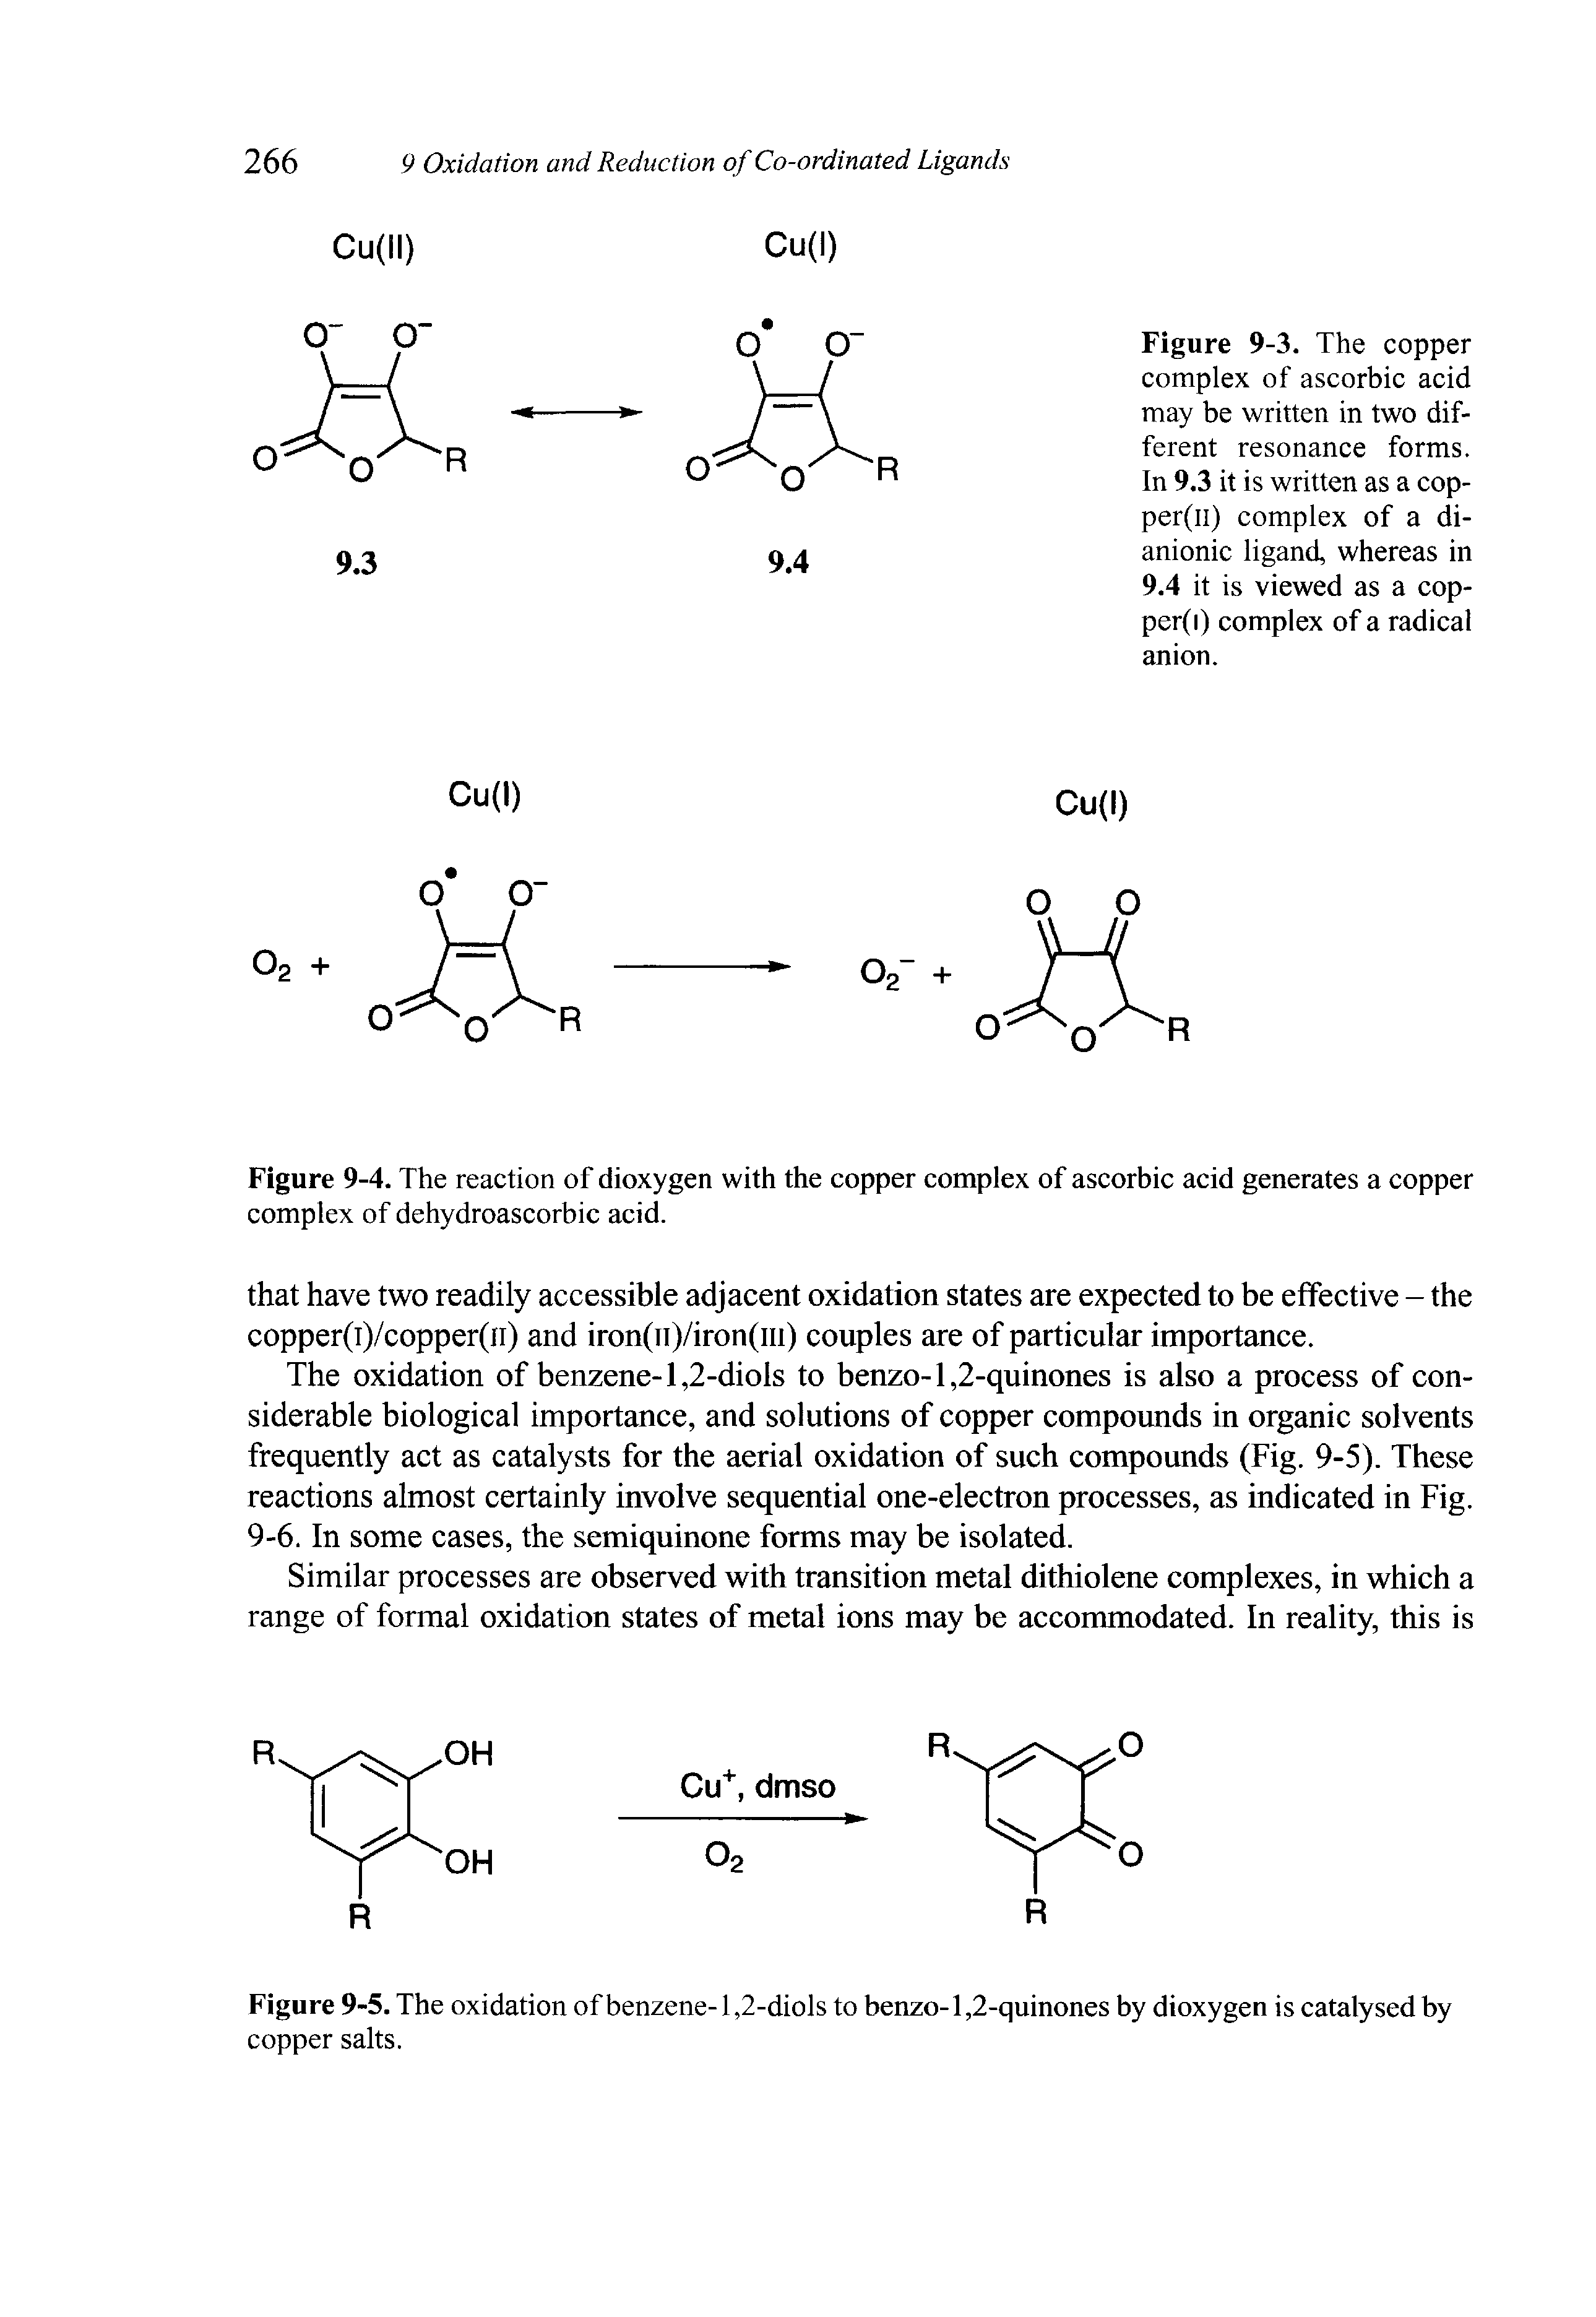 Figure 9-5. The oxidation of benzene-1,2-diols to benzo-l,2-quinones by dioxygen is catalysed by copper salts.